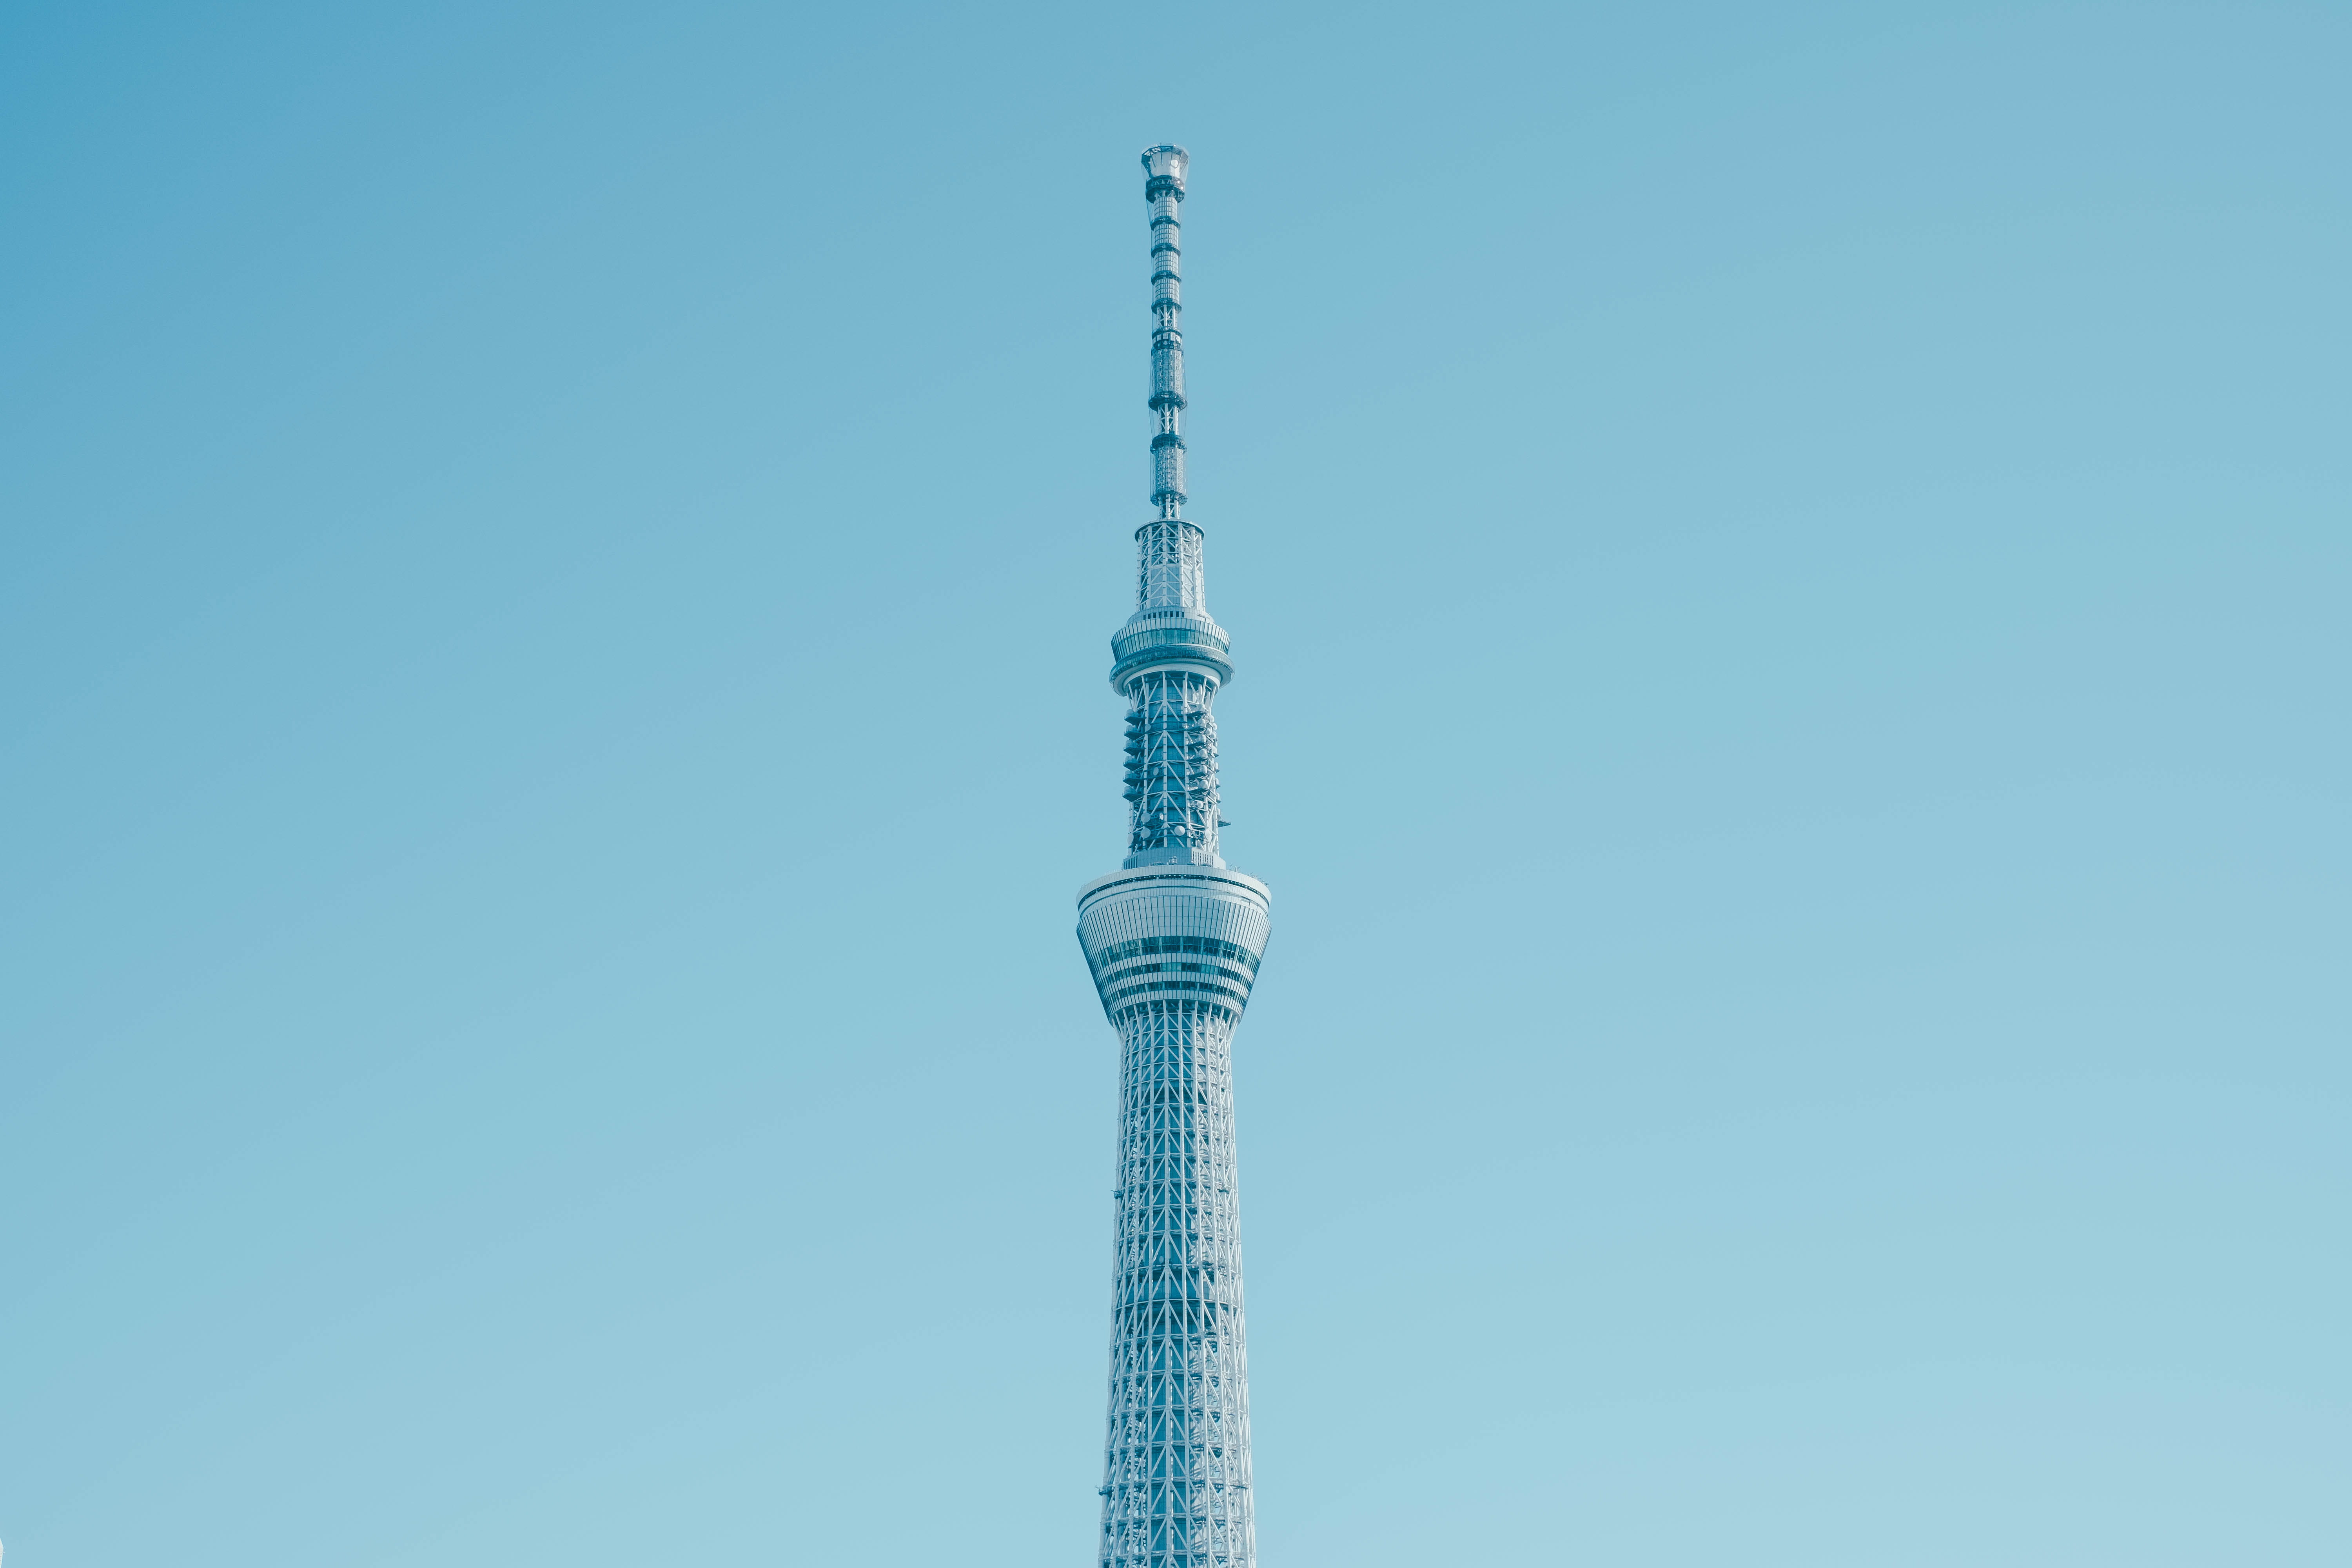 high-rise building, tower, architecture, spire, steeple, urban